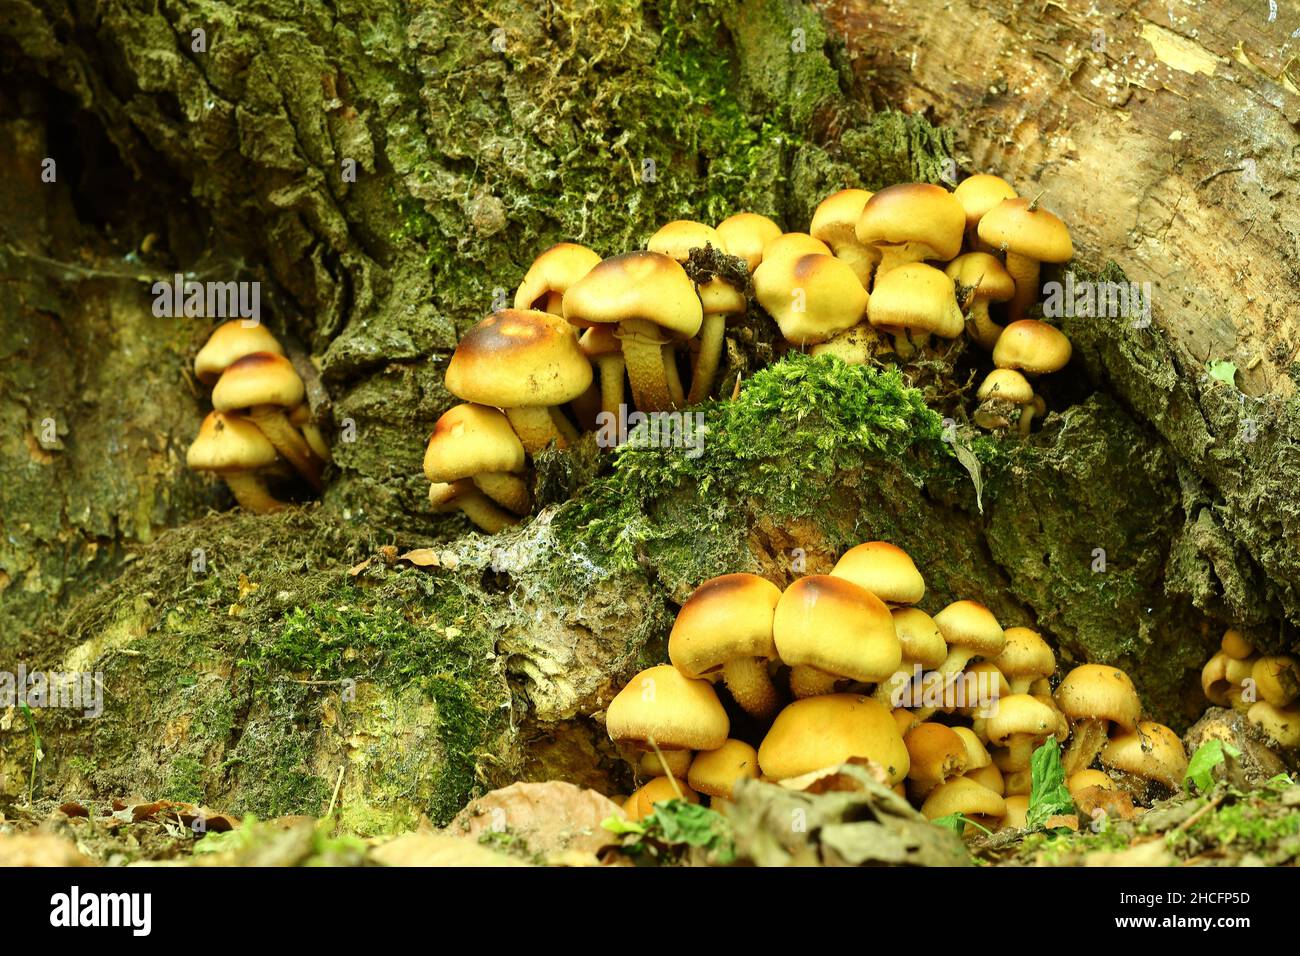 Brown arboreal mushrooms grown in the forest in autumn Stock Photo